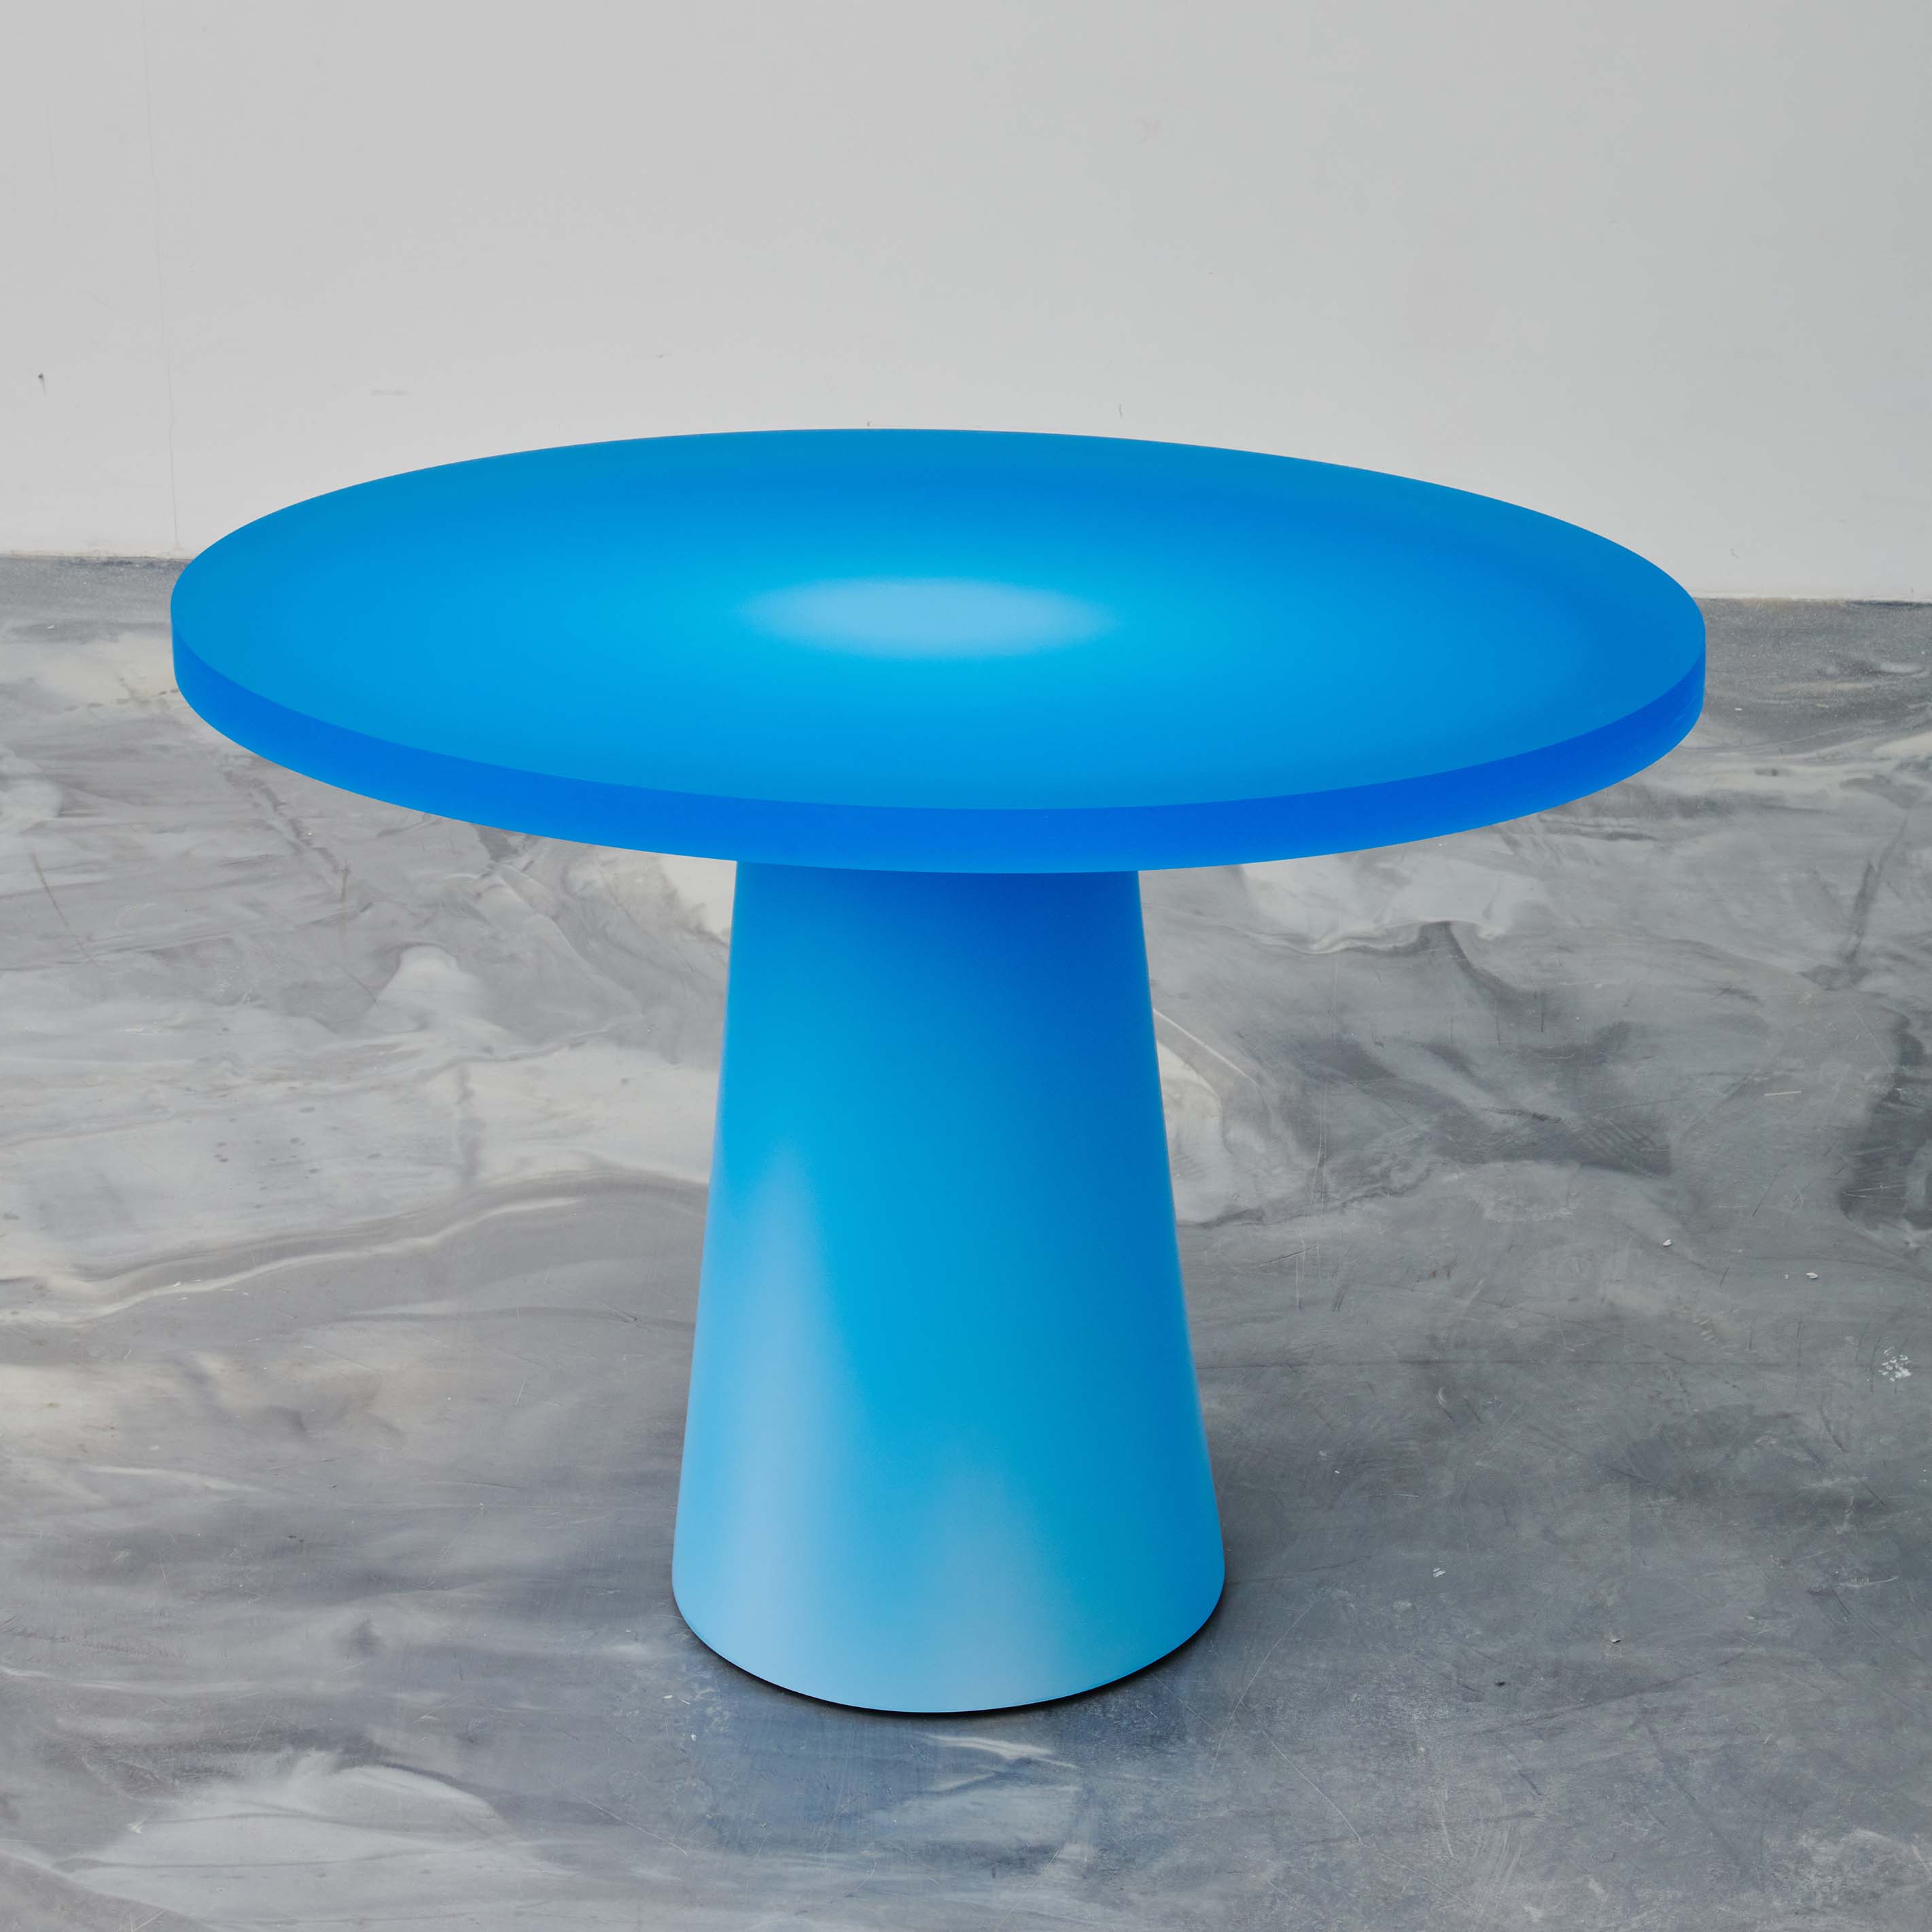 Elliptical Entry Table In Blue